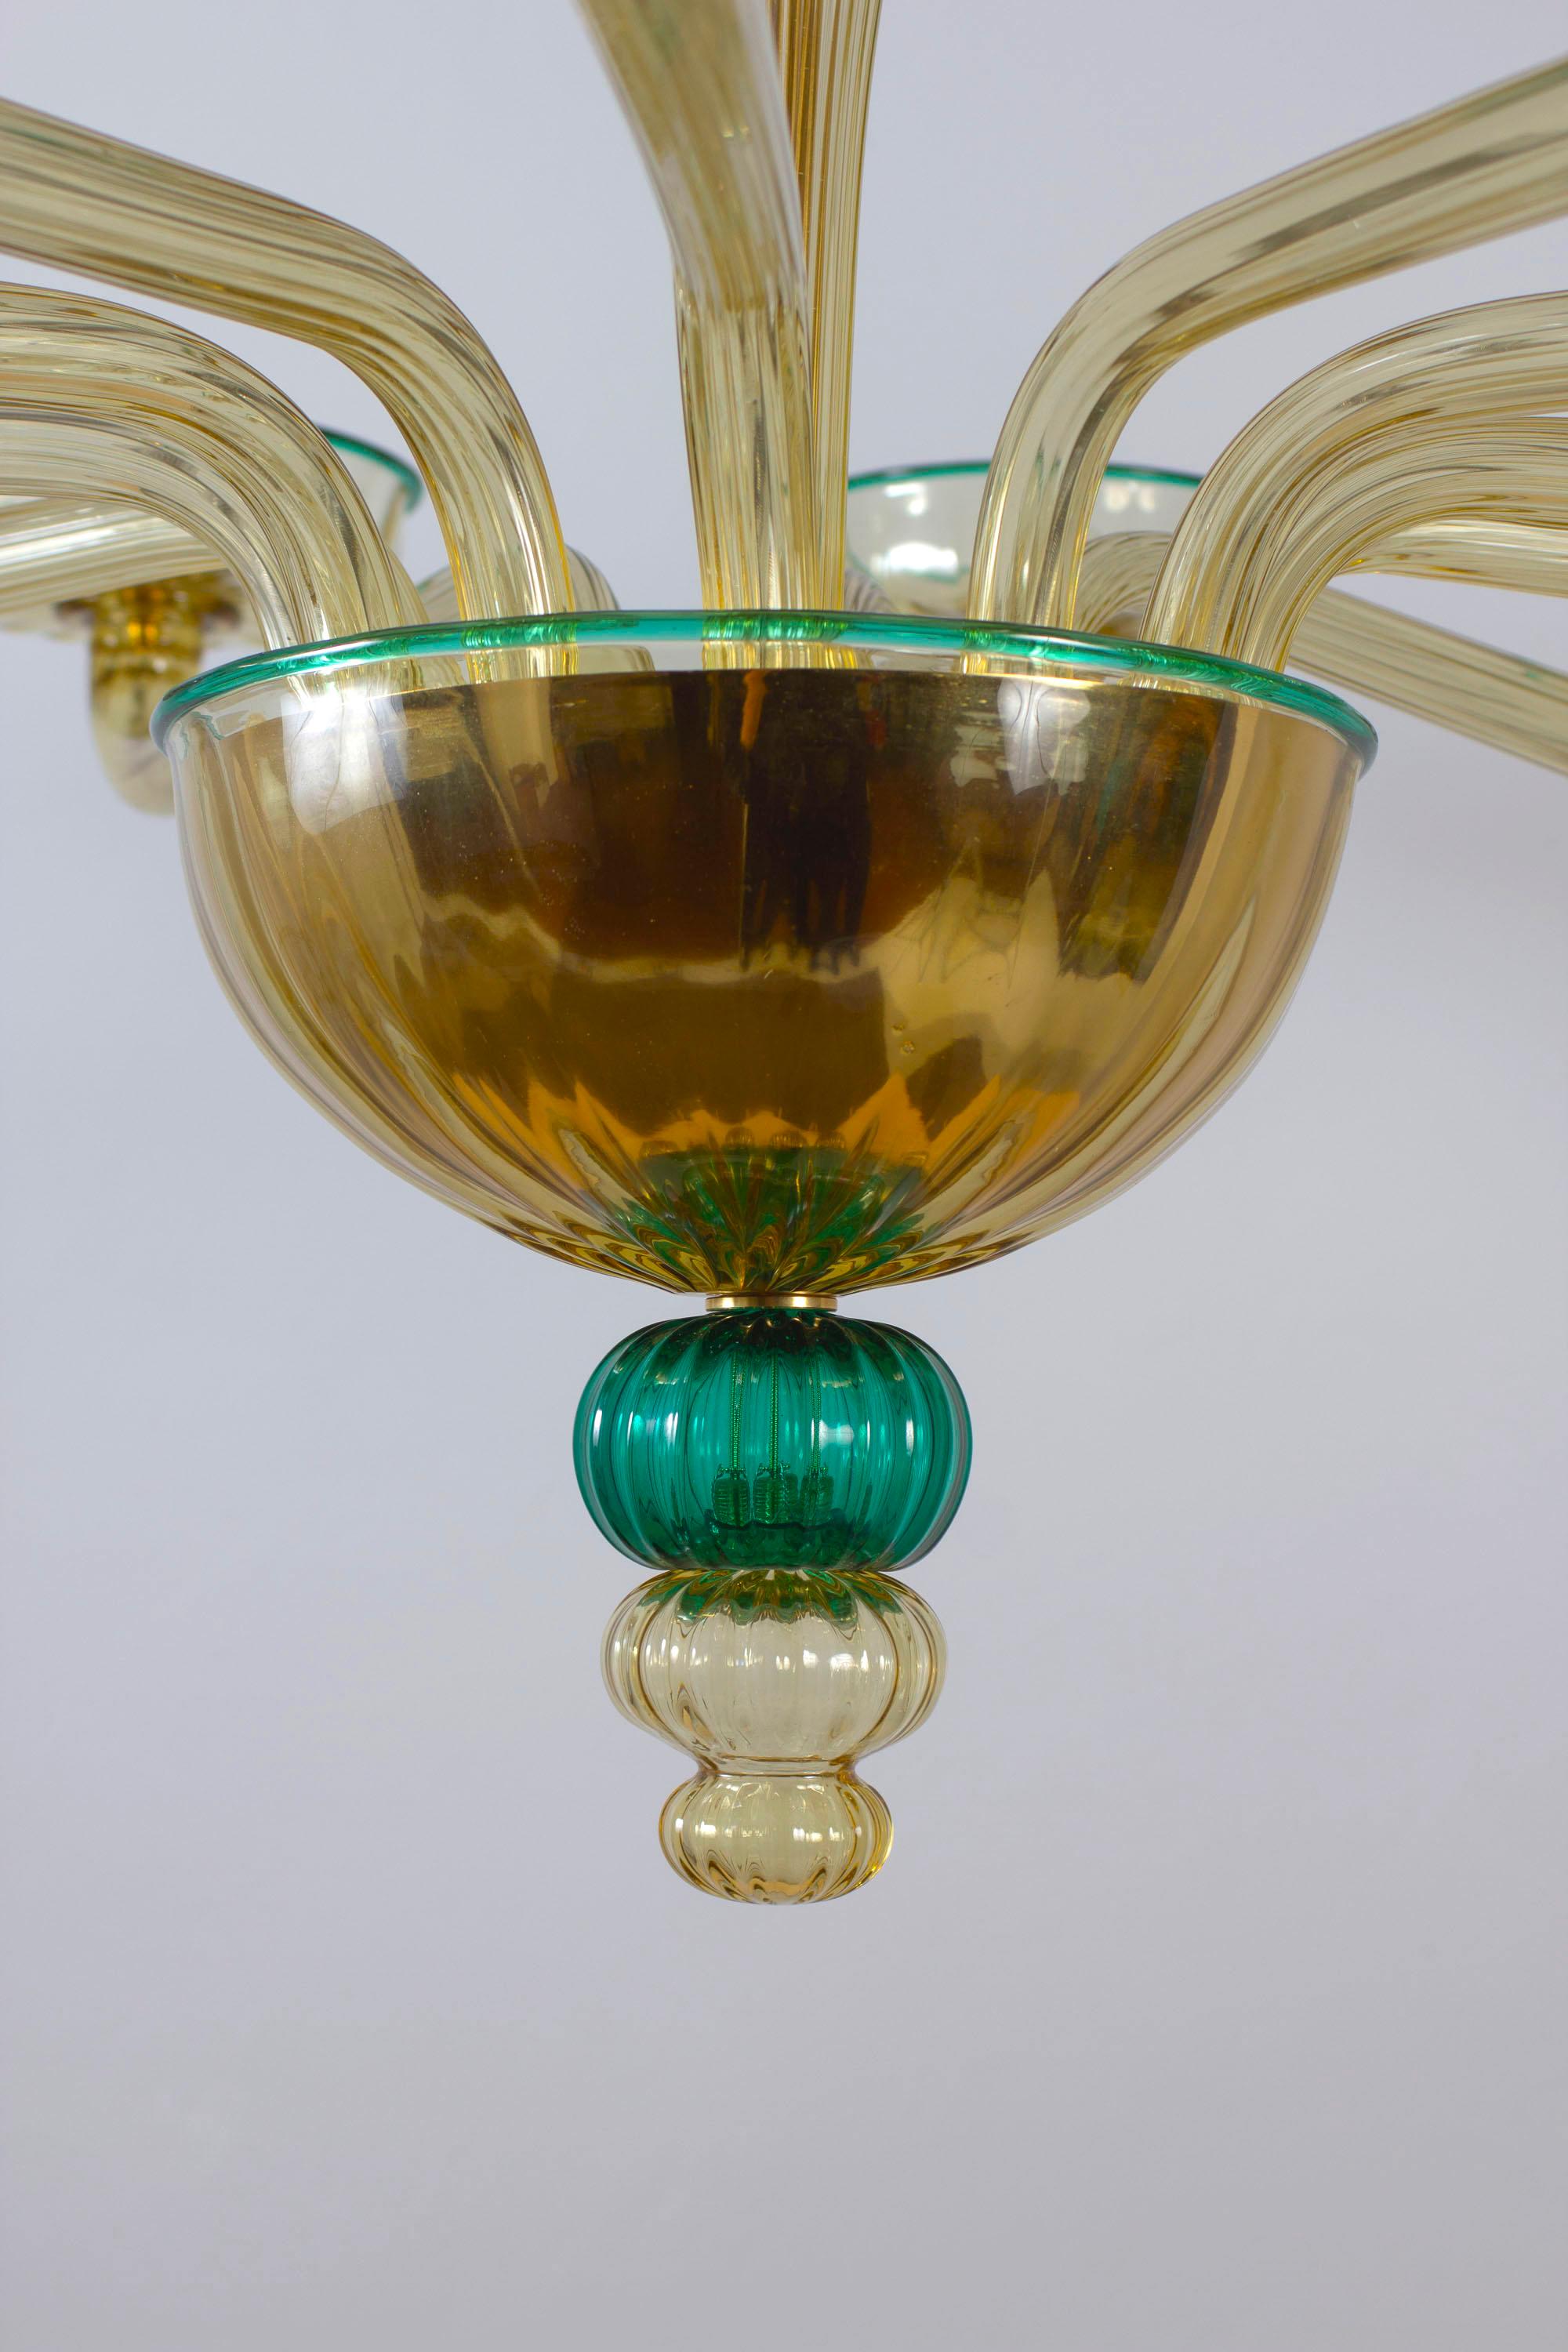 Chandelier Amber and Emerald Hand Blown Glass, attributed to Venini, circa 1970s For Sale 6